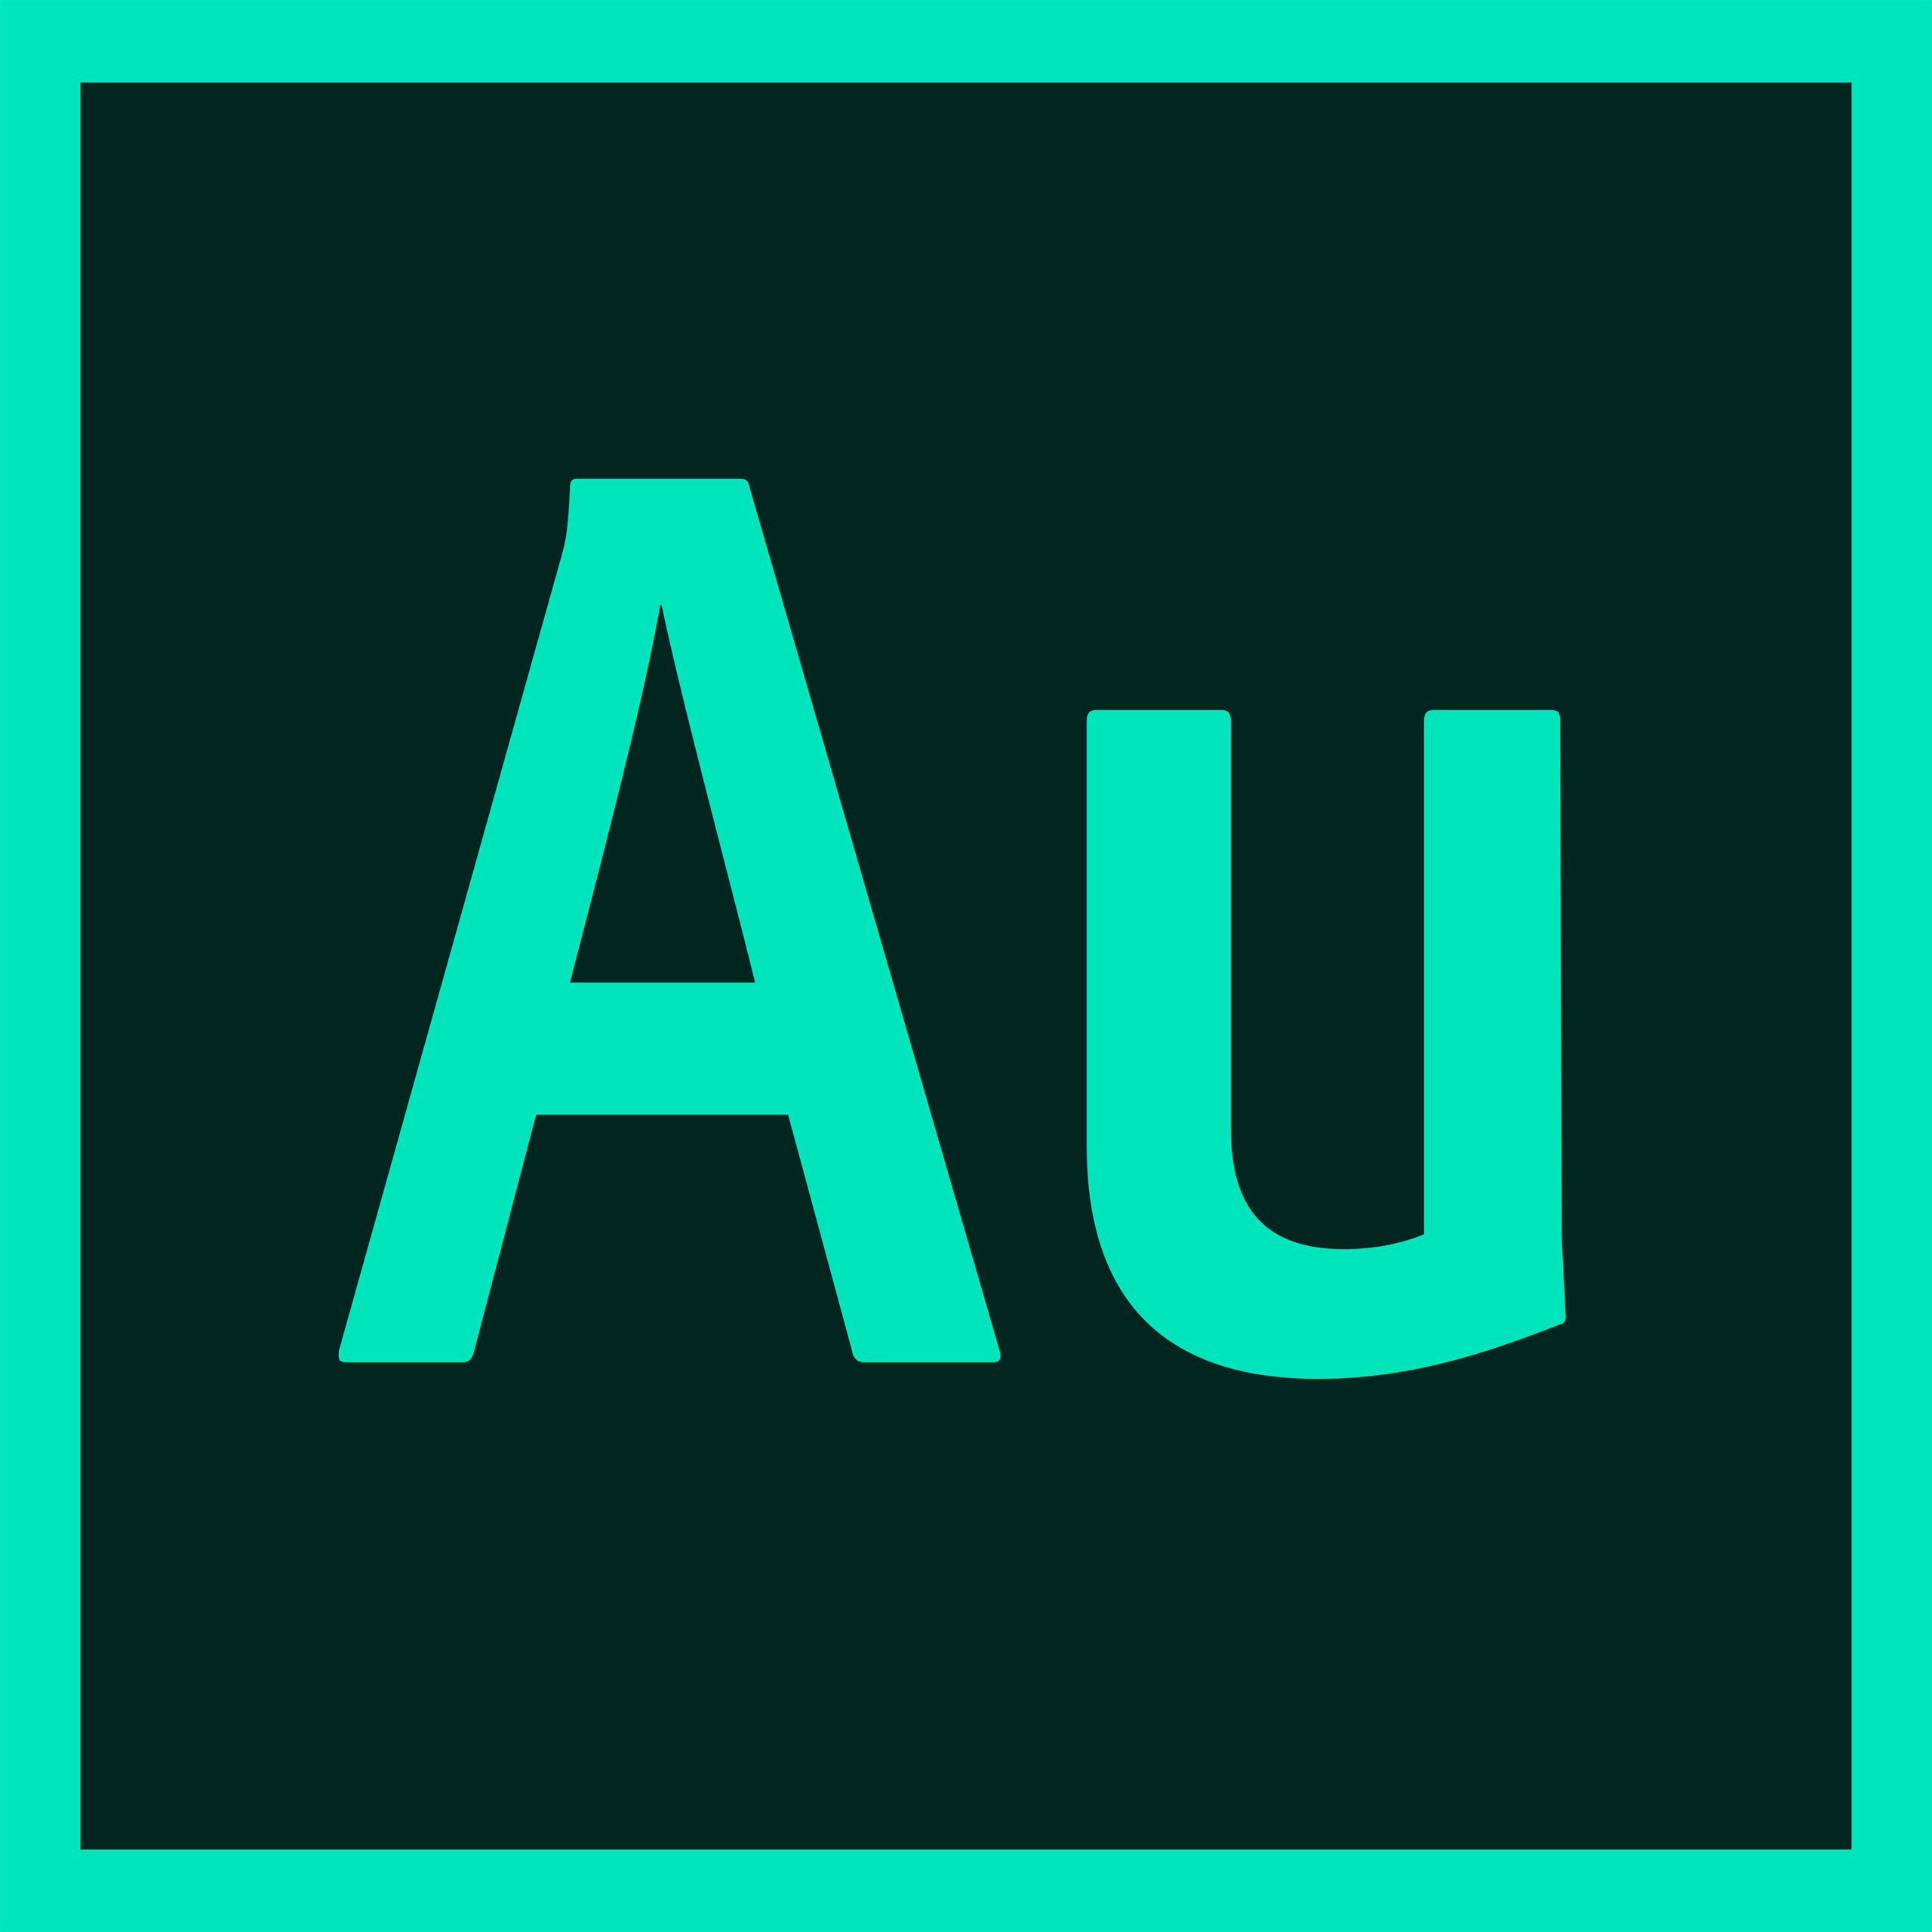 adobe audition recording settings